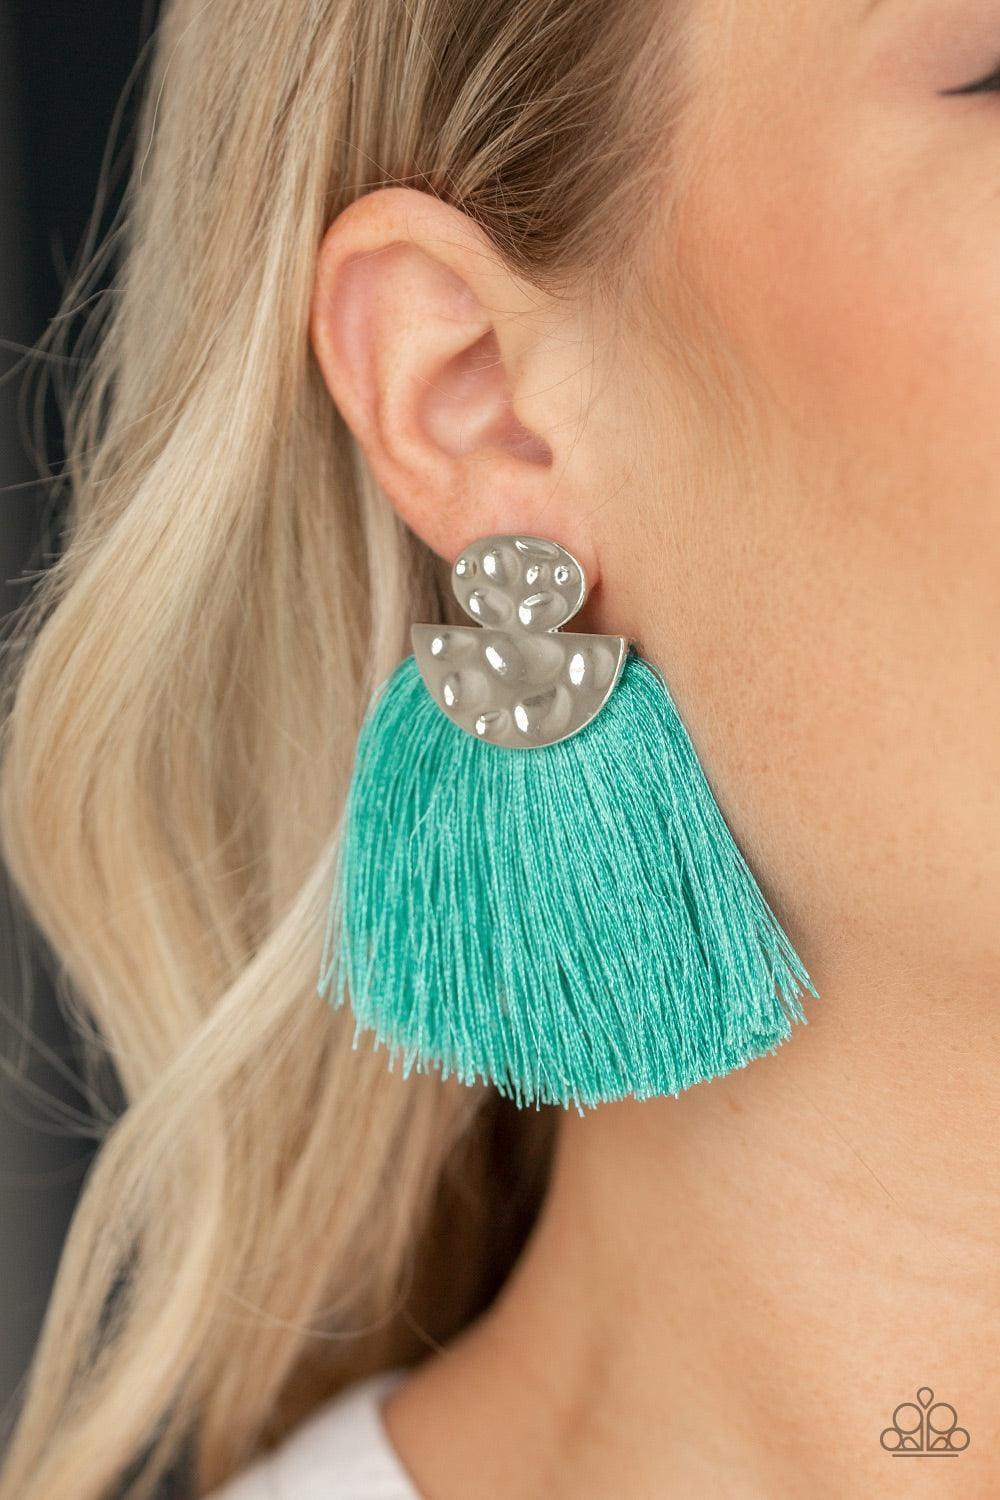 Paparazzi Accessories - Make Some Plume - Blue Earrings - Bling by JessieK